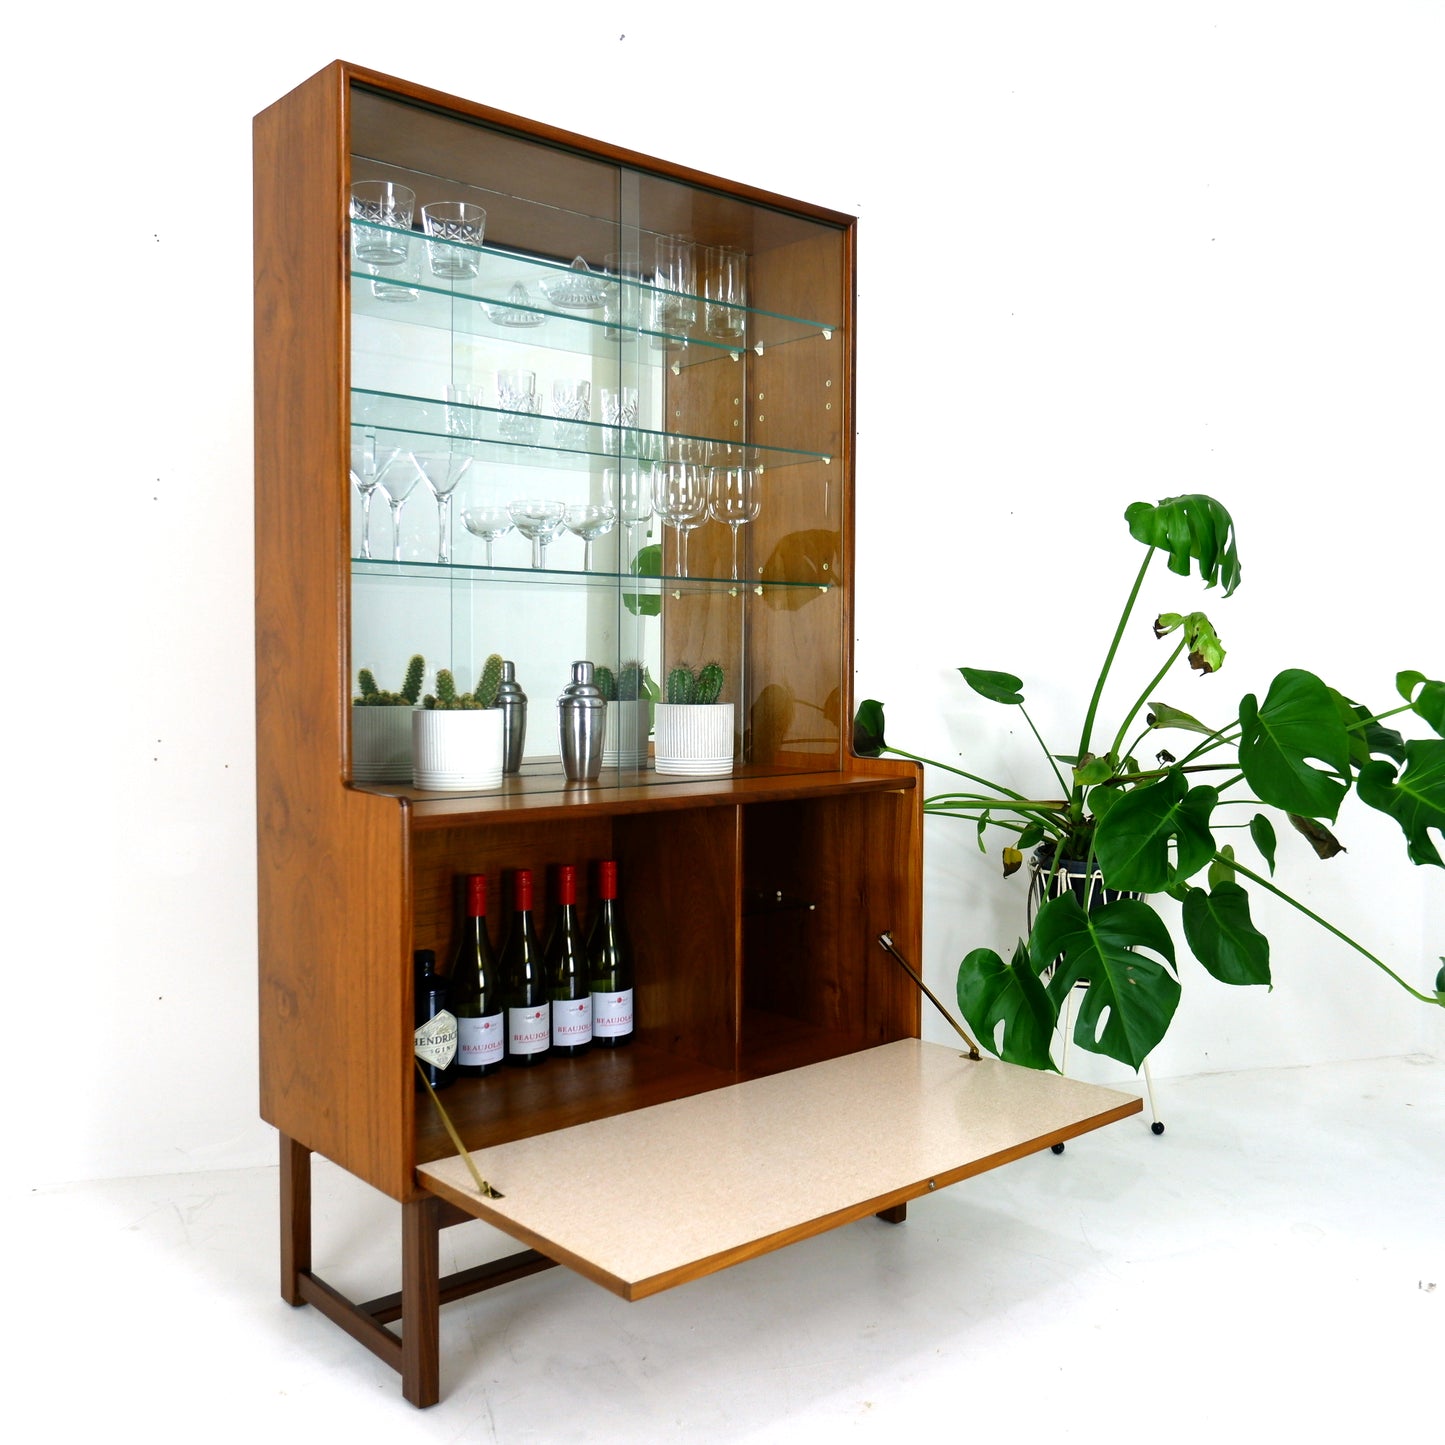 Turnidge of London Mirrored Cocktail/Drinks Cabinet in Teak and Glass - Mid Century Modern